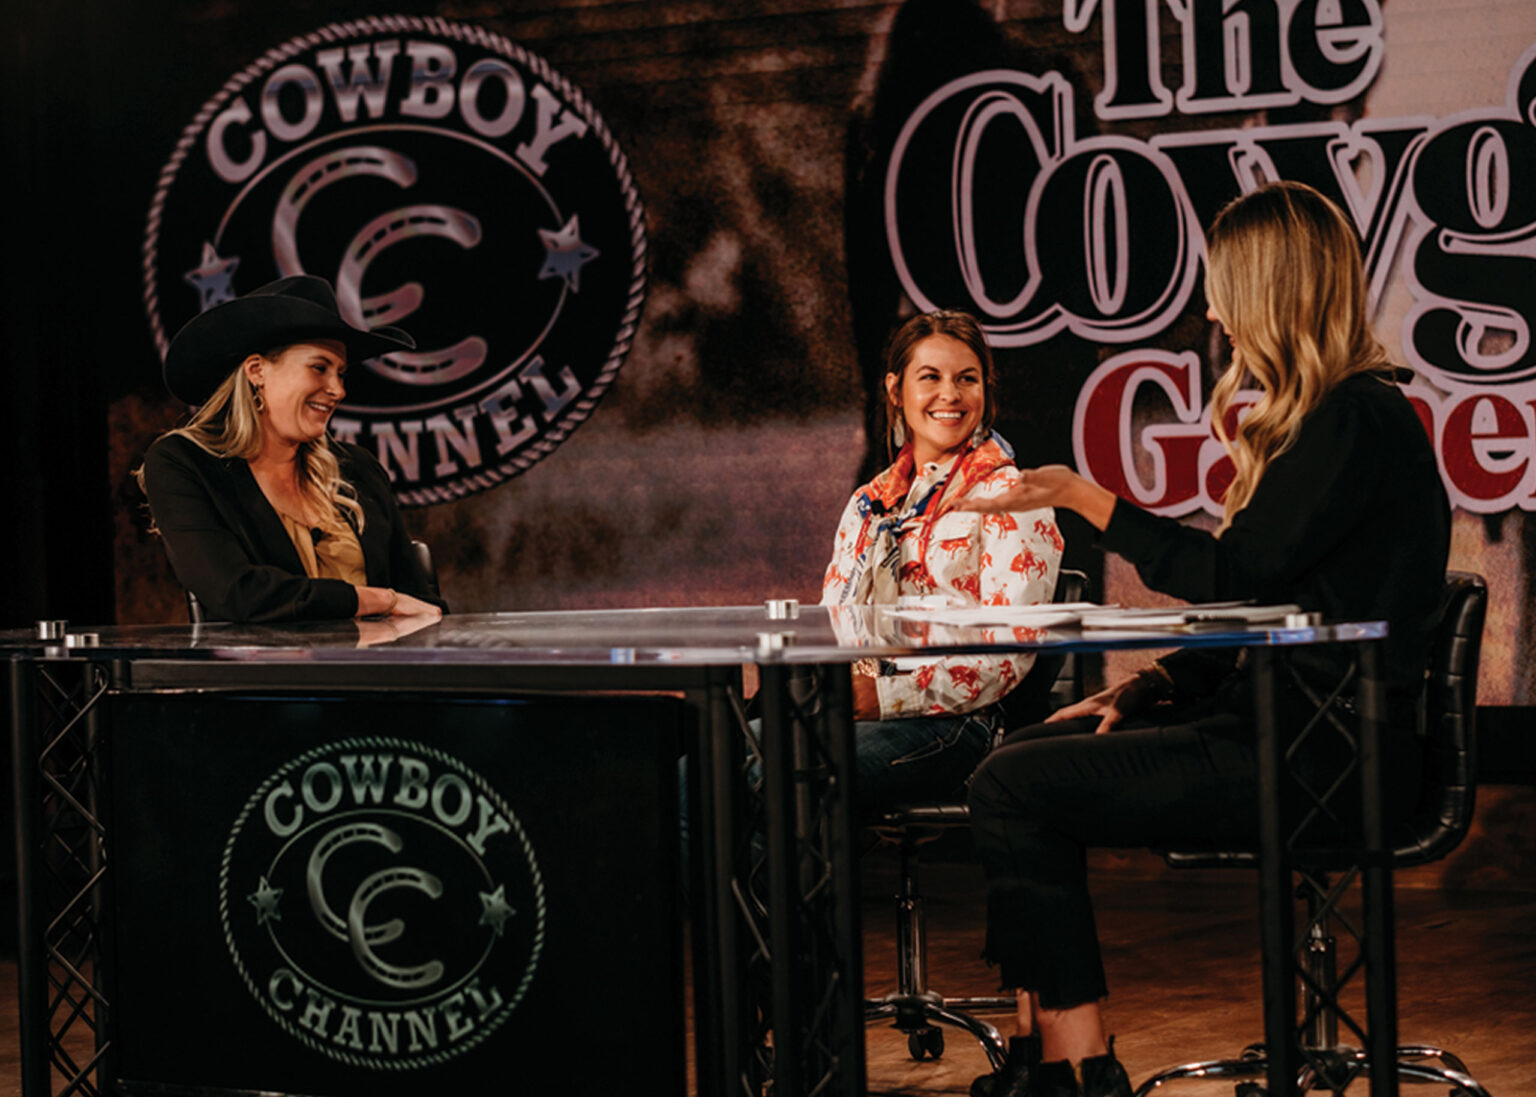 About The Cowgirl Gathering